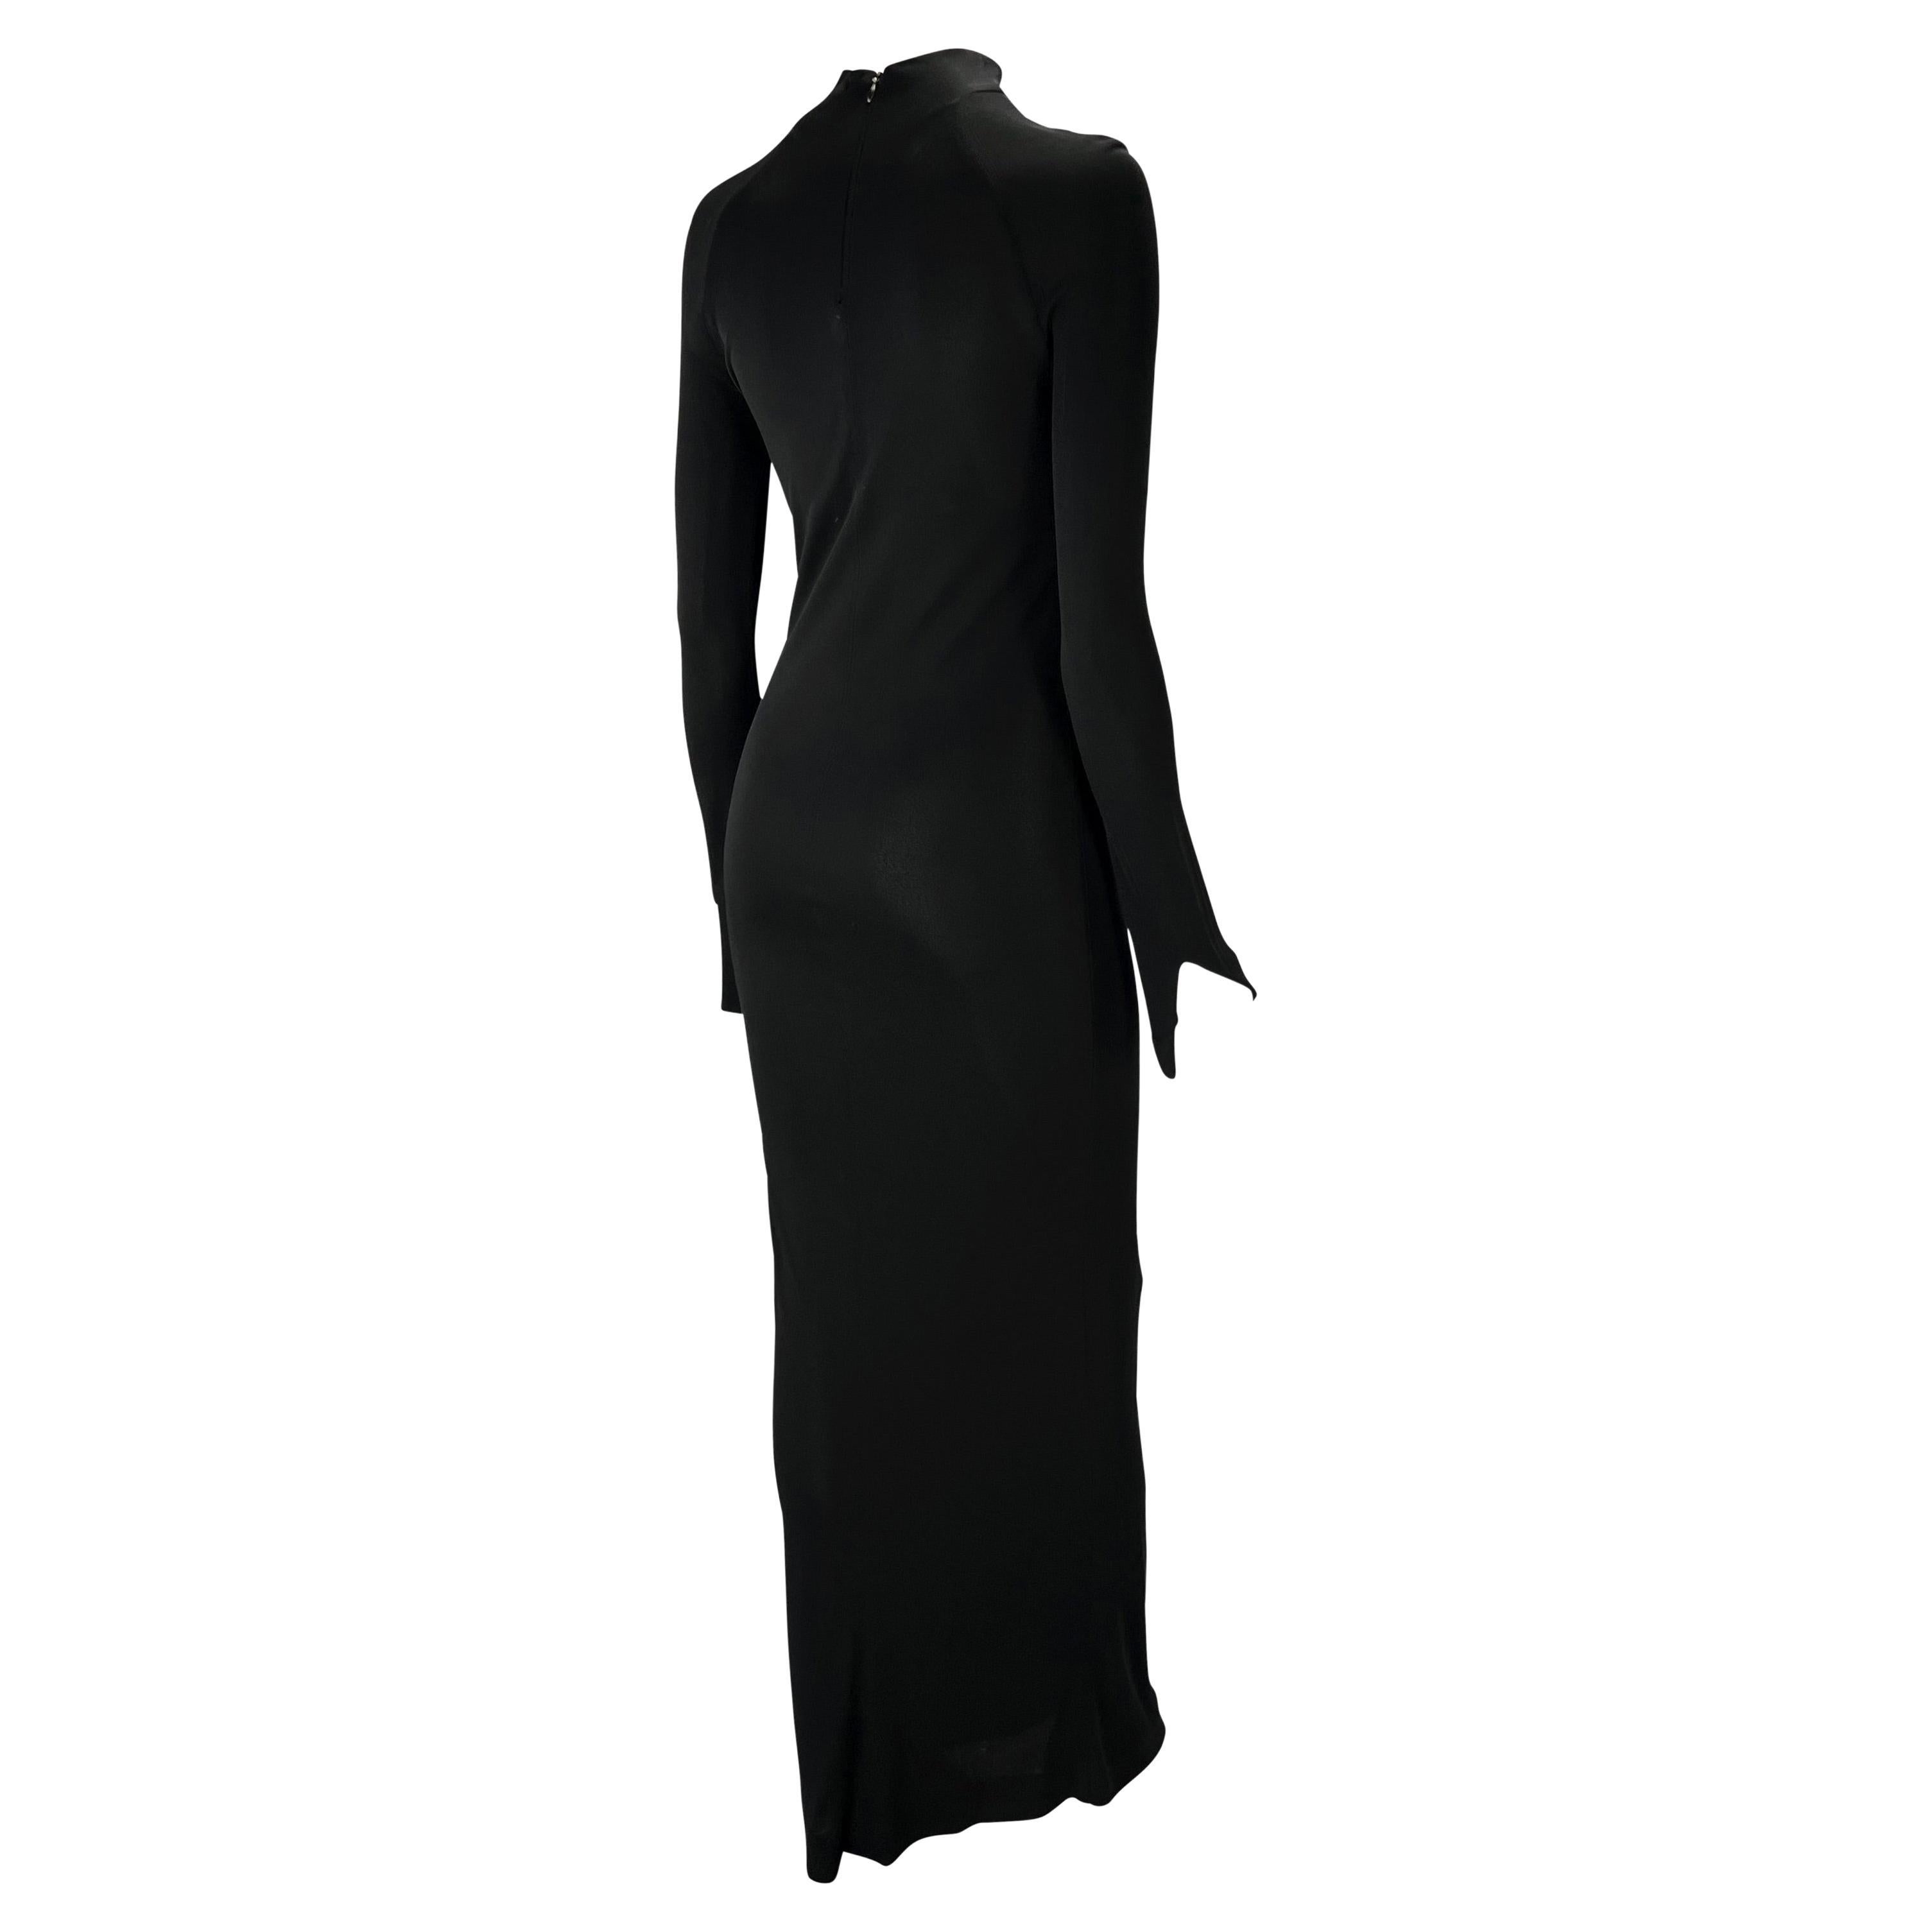 S/S 1998 Gucci by Tom Ford Black Stretch Viscose Long Sleeve Gown For Sale 3